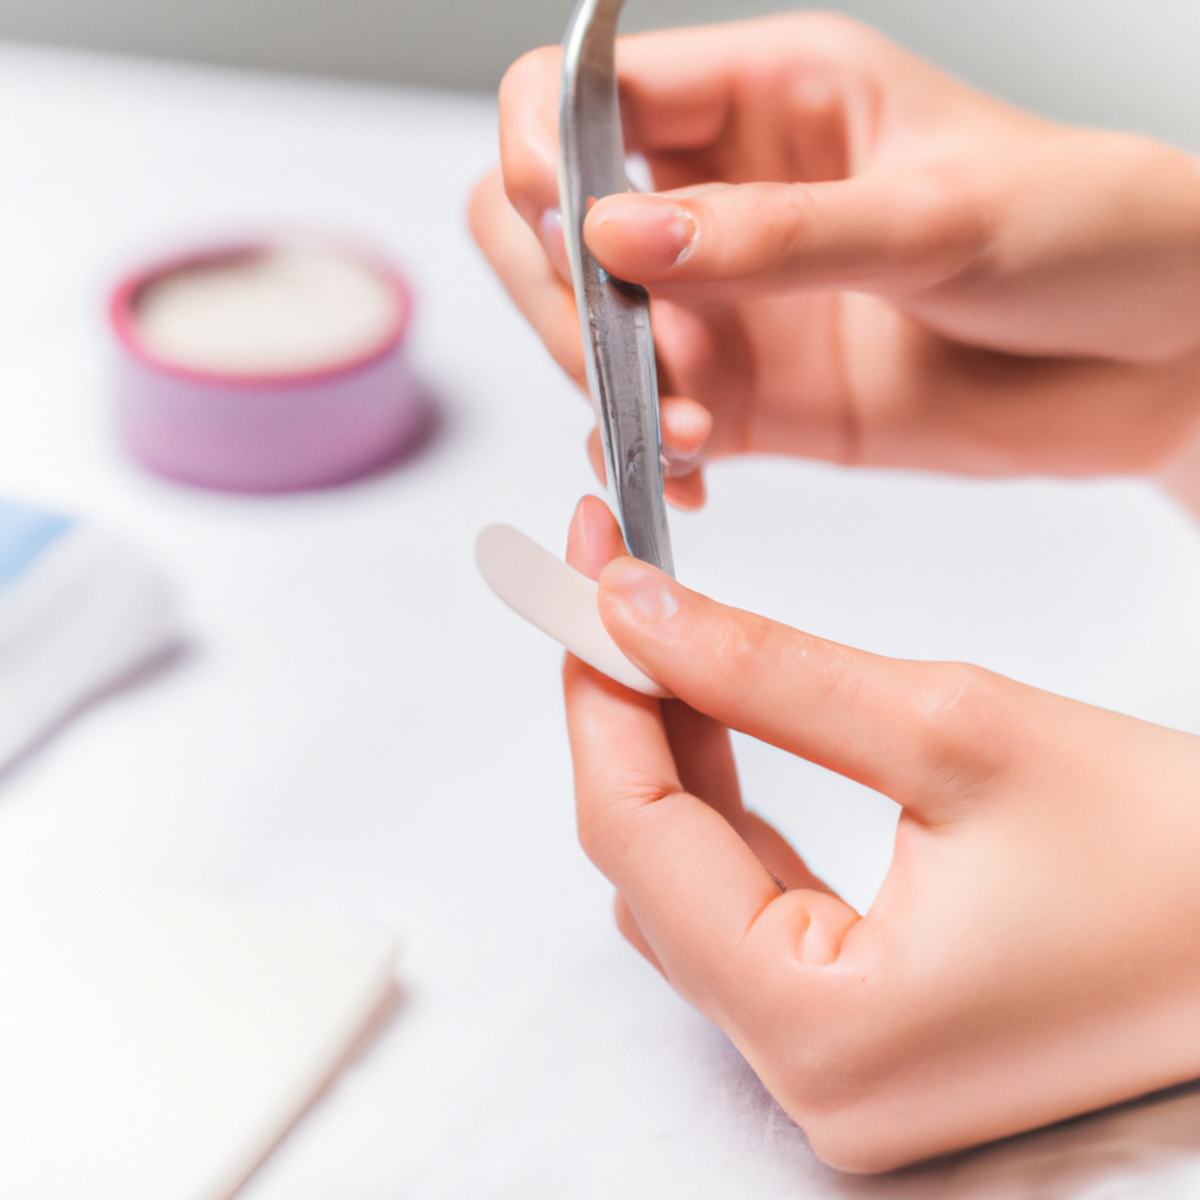 Close-up of hand using tweezers to remove hangnail, showcasing precision and tools for effective nail care -Nail disorders treatment